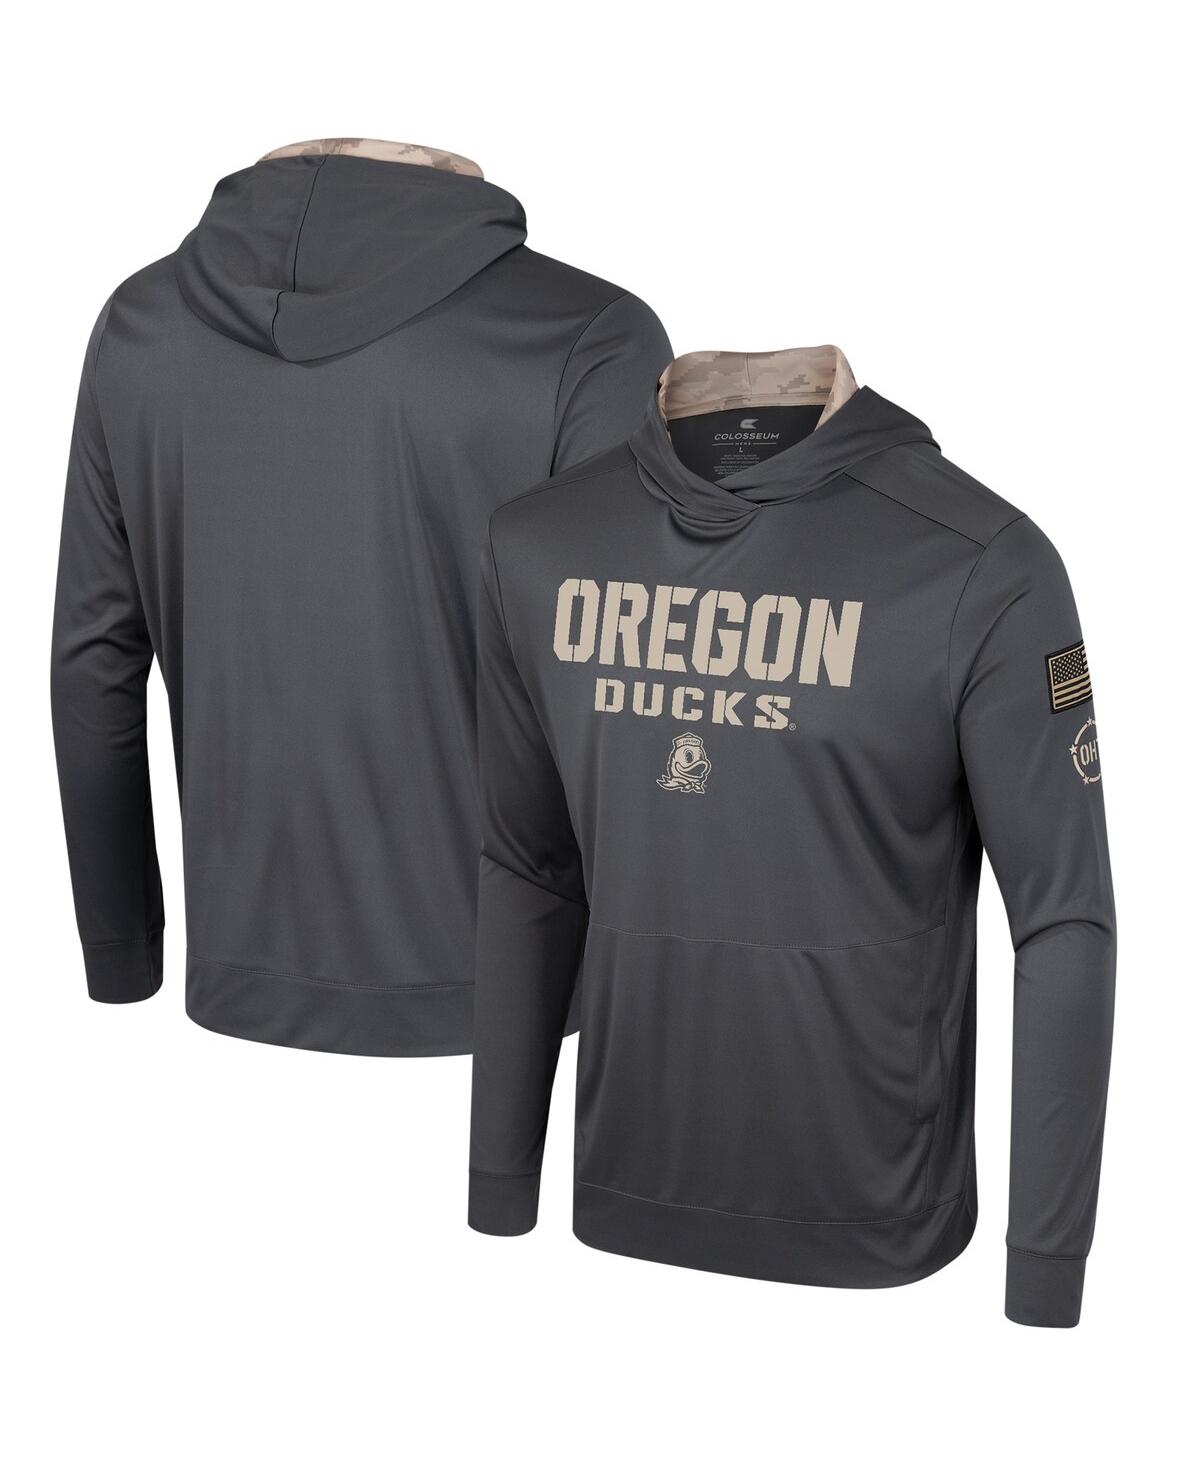 Colosseum Men's  Charcoal Oregon Ducks Oht Military-inspired Appreciation Long Sleeve Hoodie T-shirt